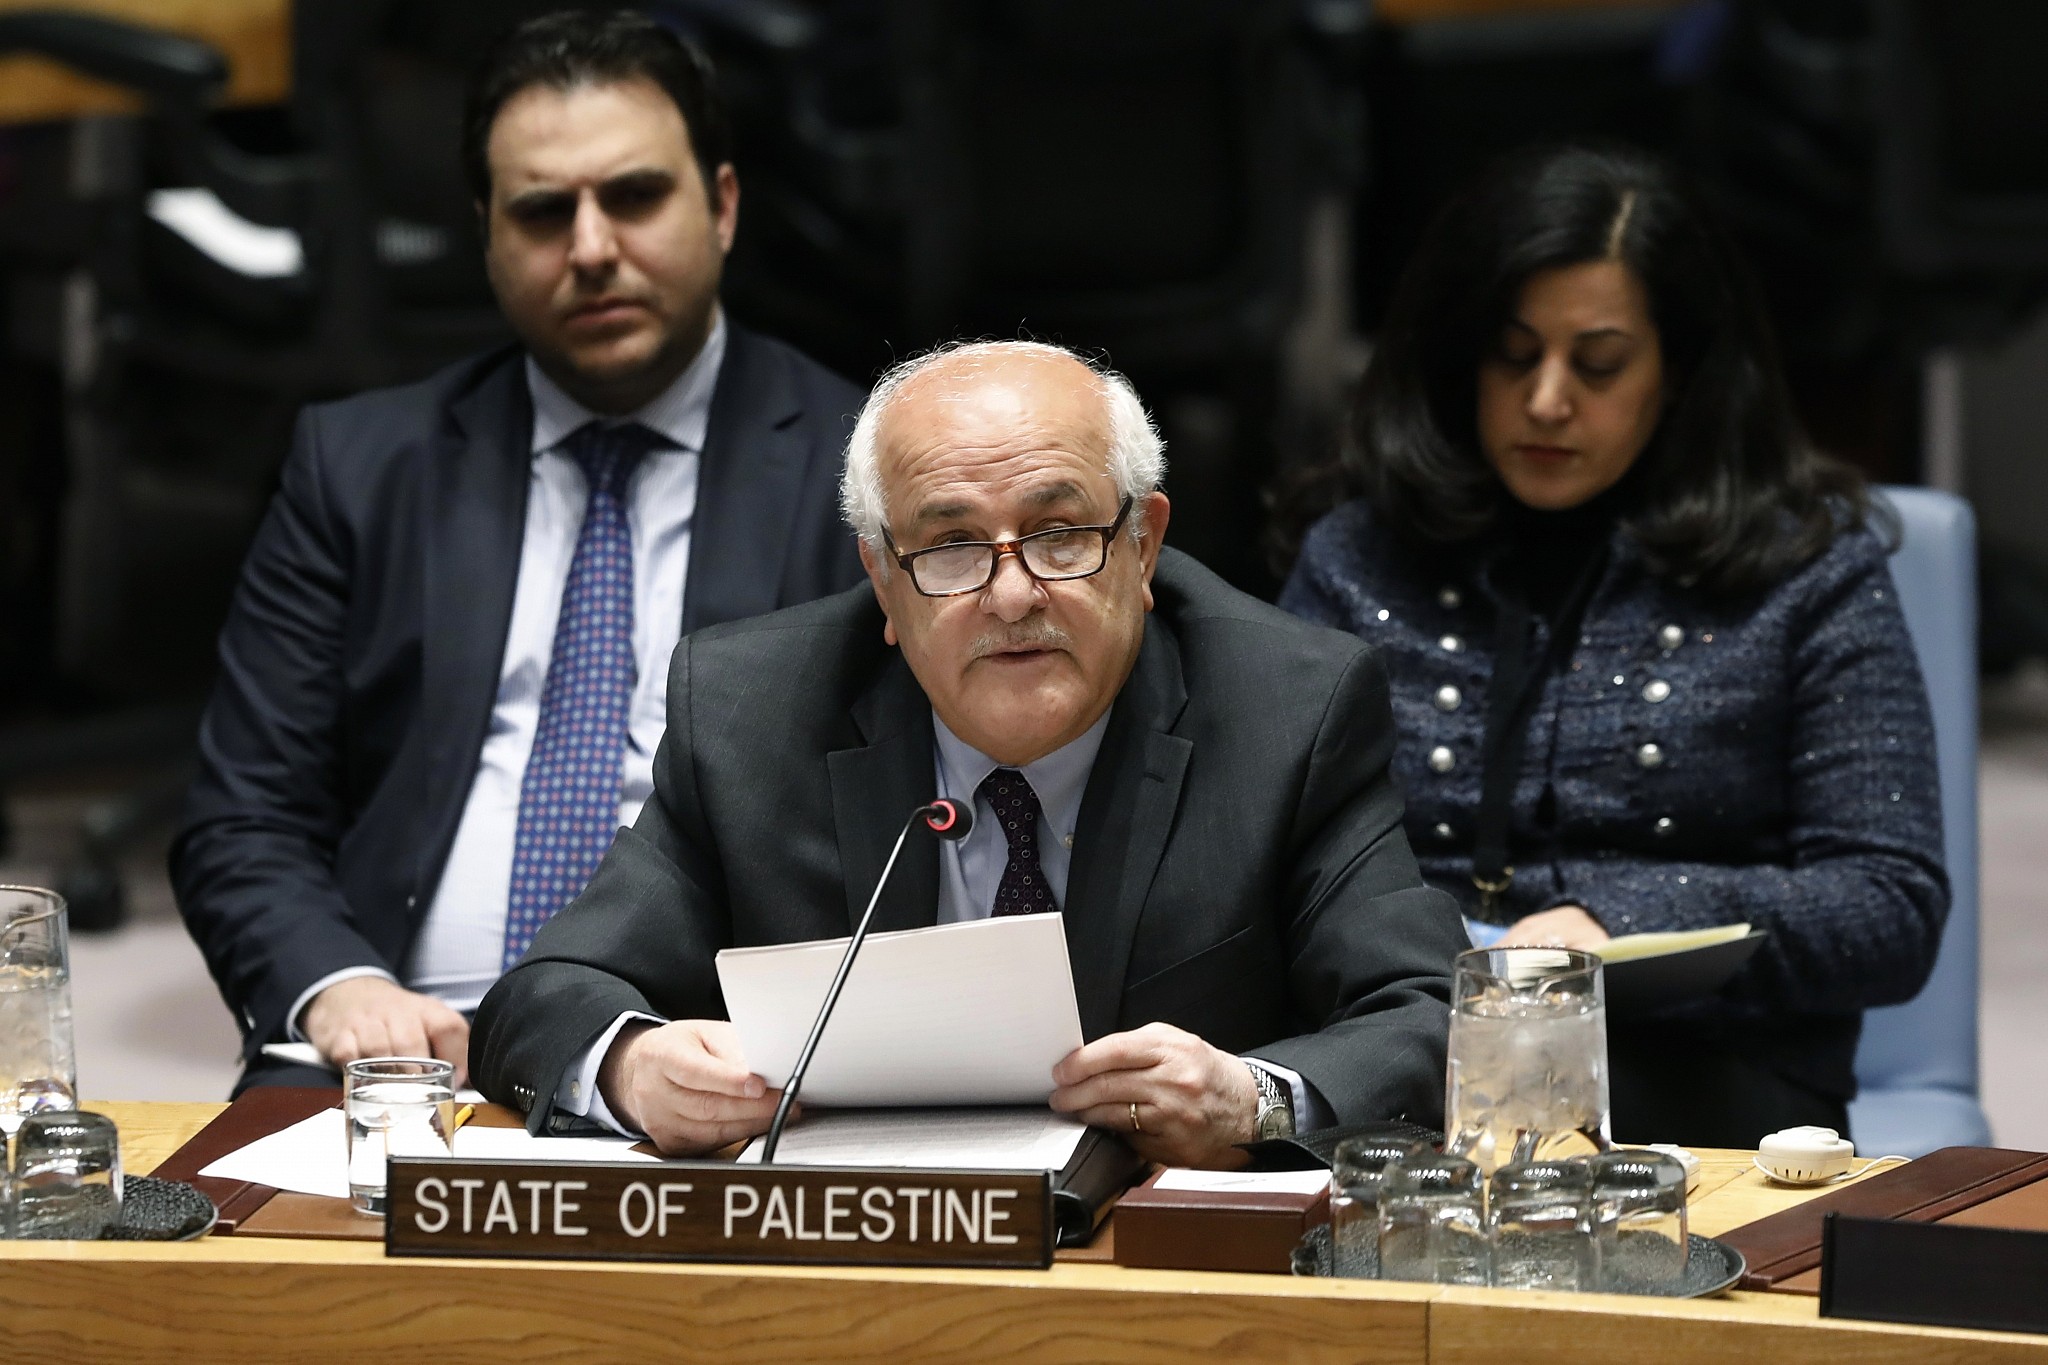 Palestine's UN envoy to begin consultations on holding a peace conference